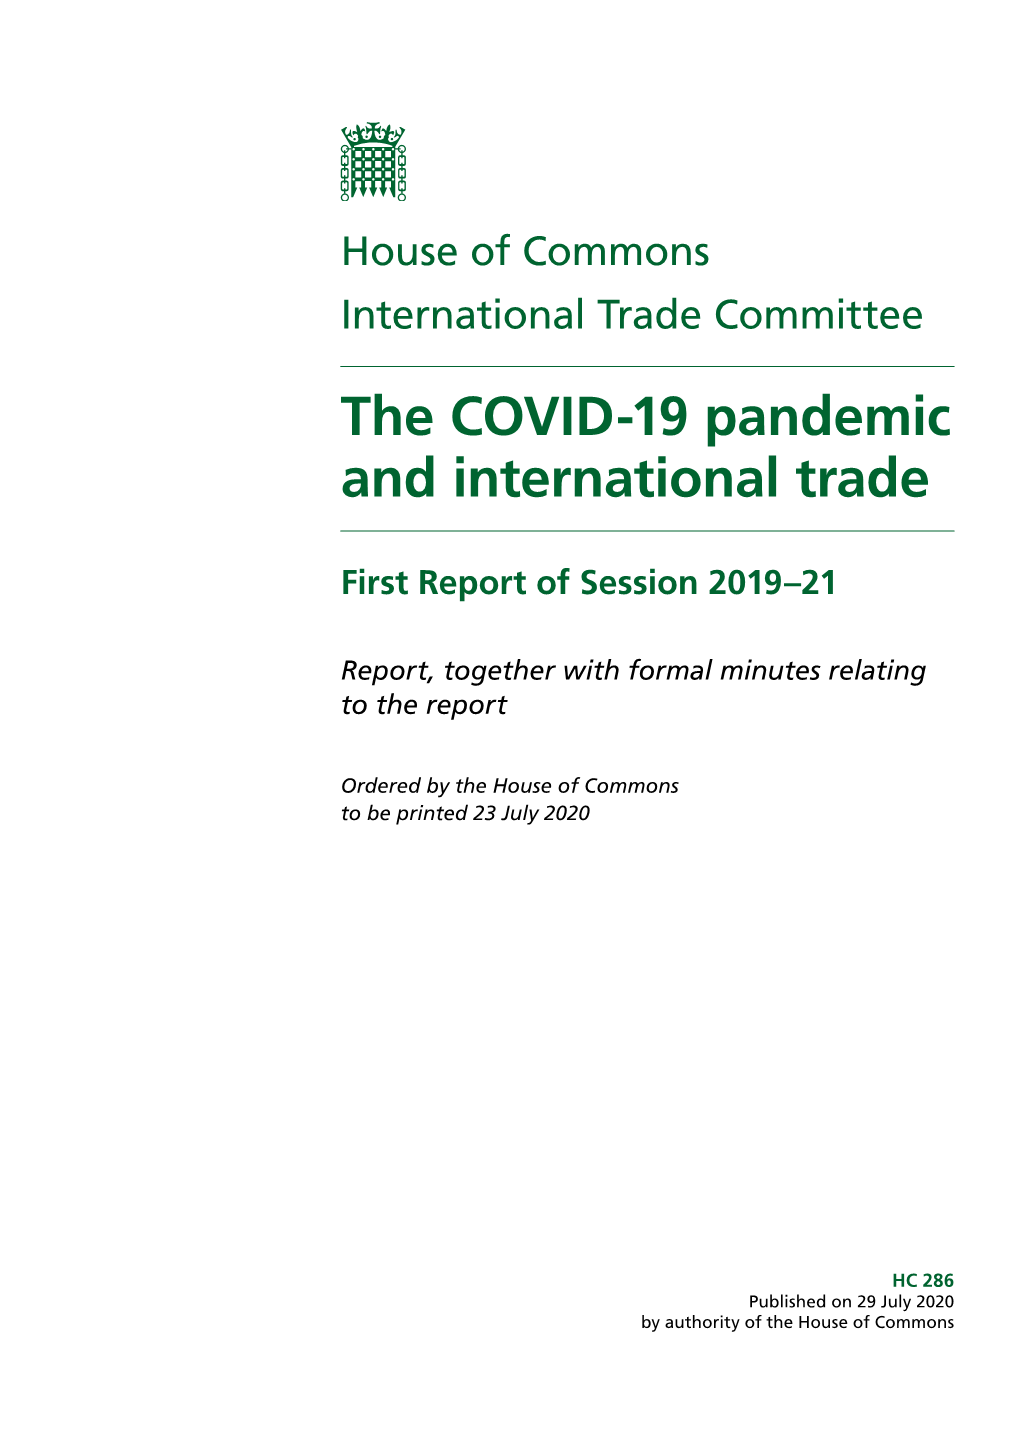 The COVID-19 Pandemic and International Trade